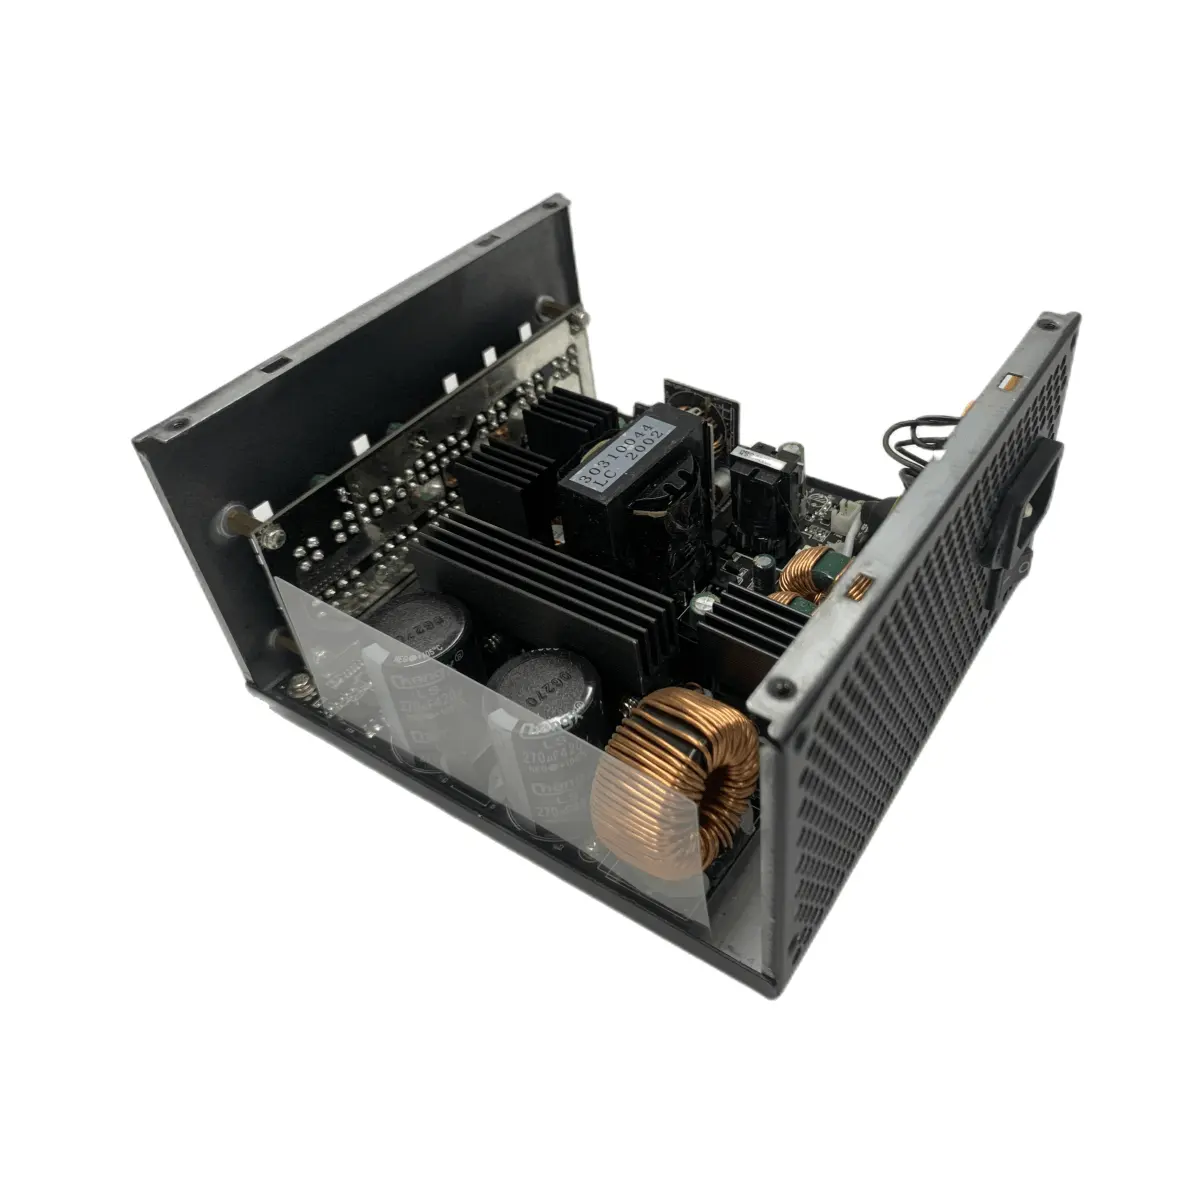 Hot Selling Power Supply Atx 550w-750w For Pc Gaming Fully Custom Case And Logo Power Supply